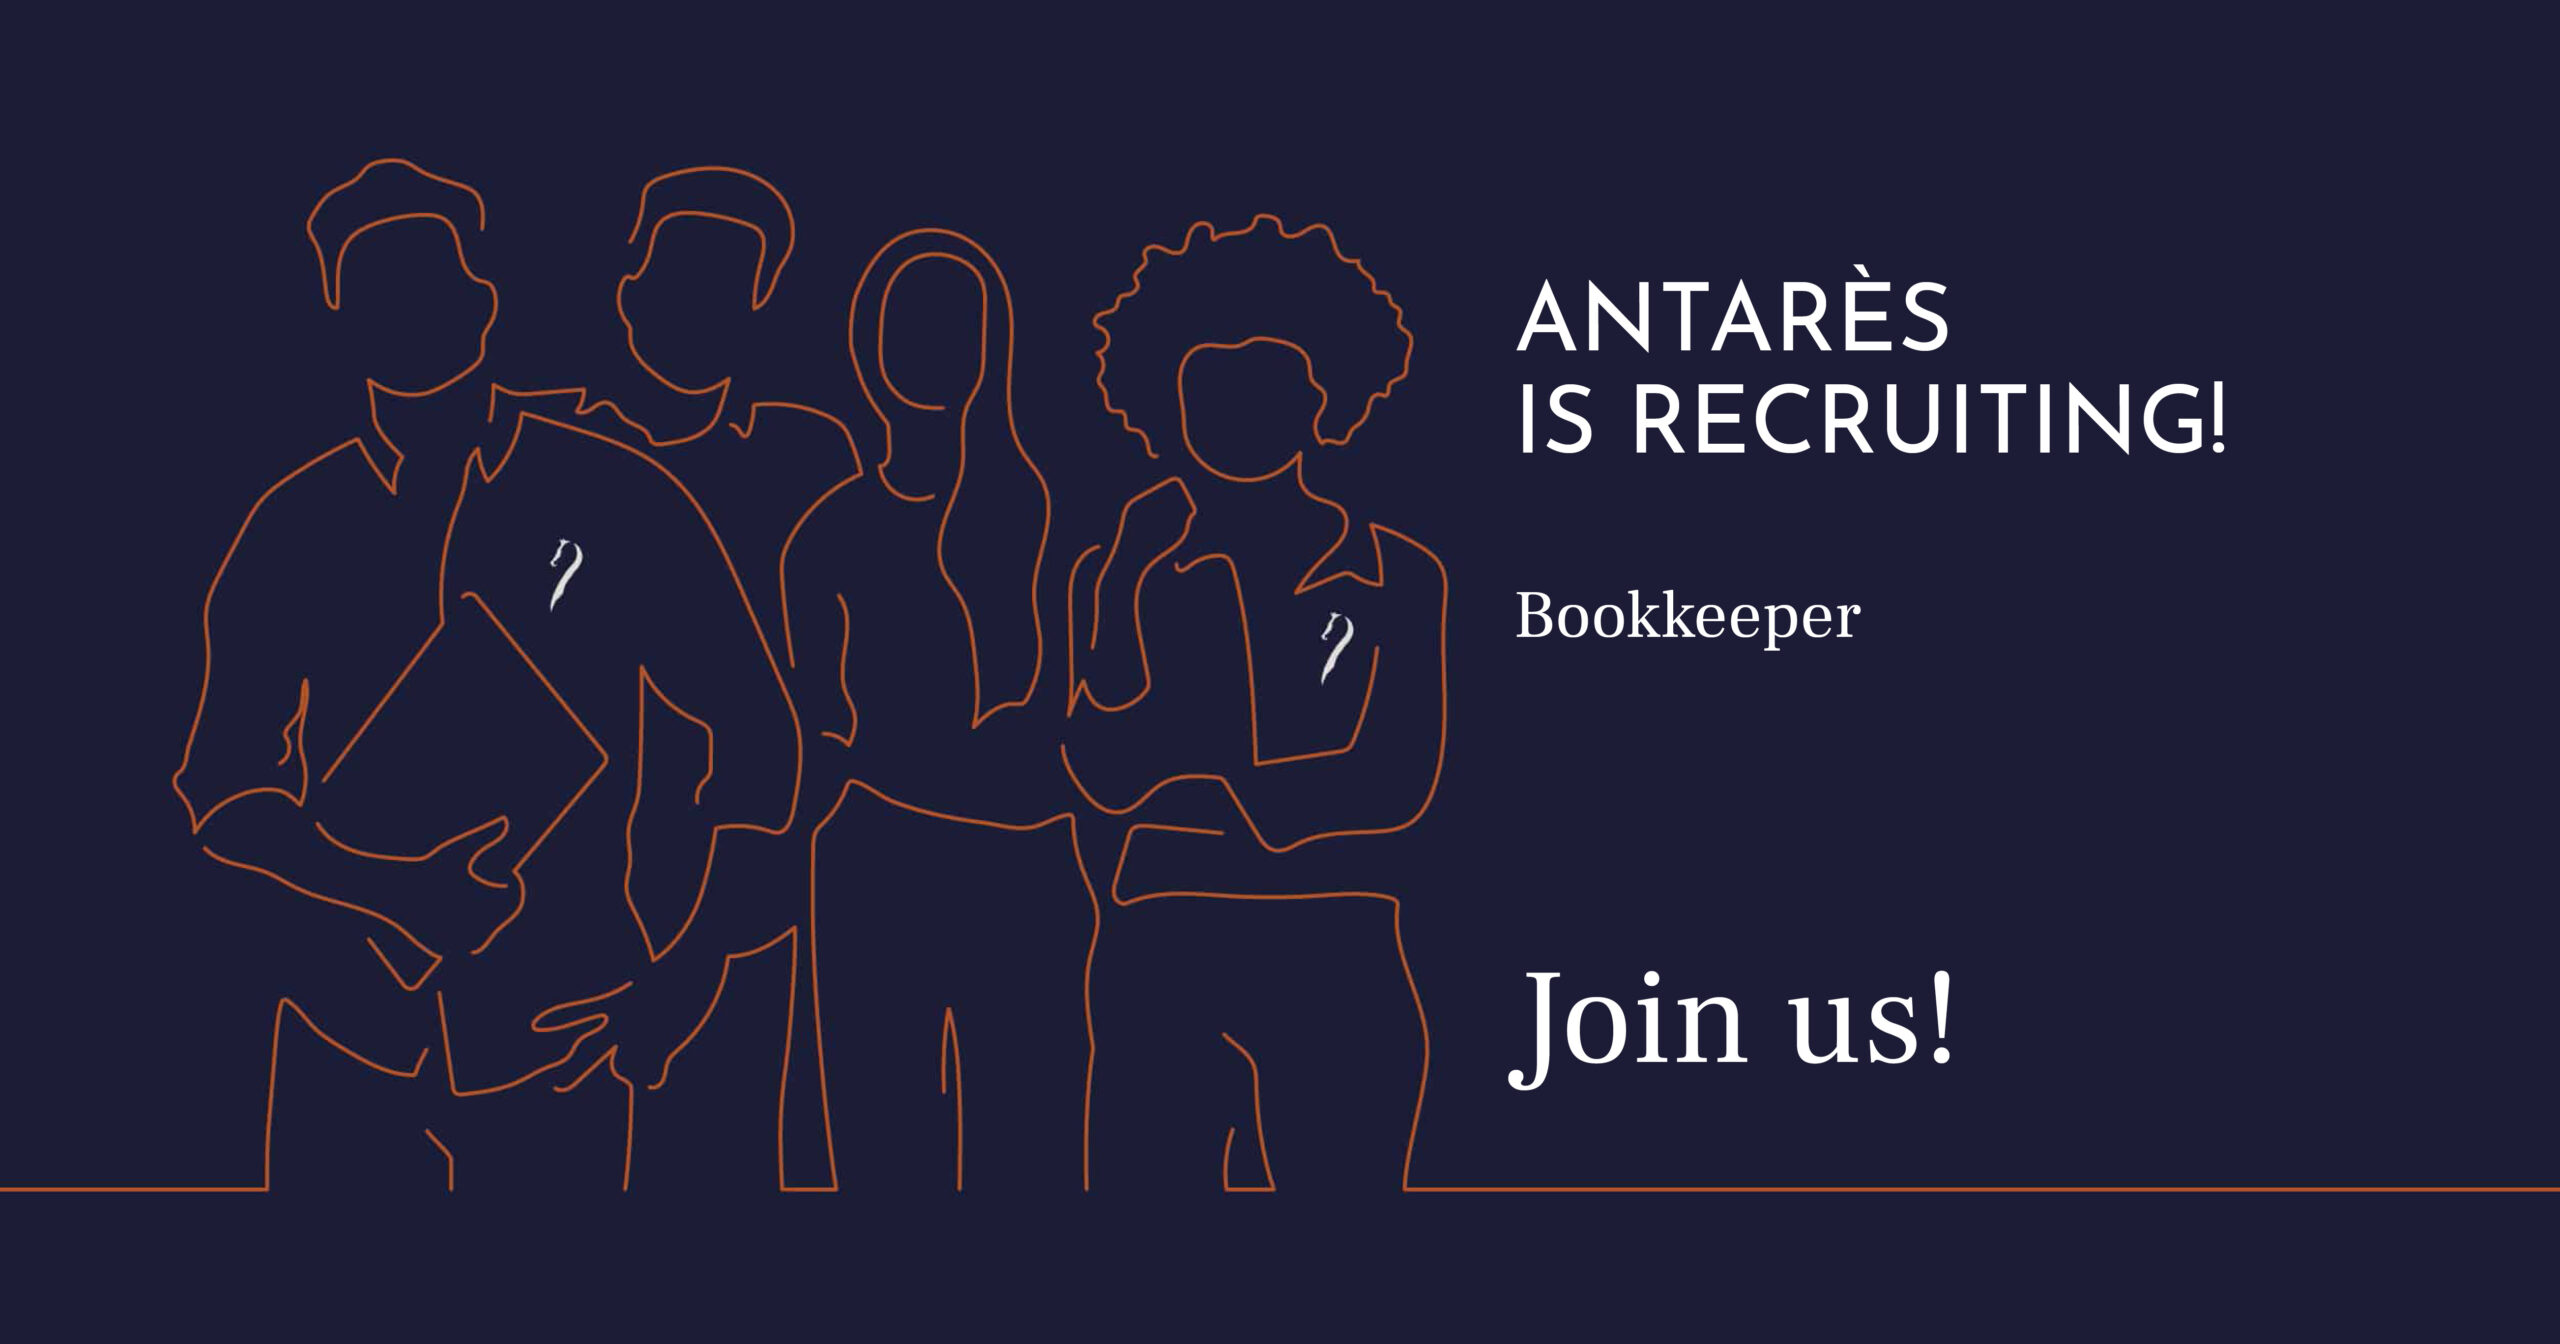 Recruitment of a bookkeeper by Antarès